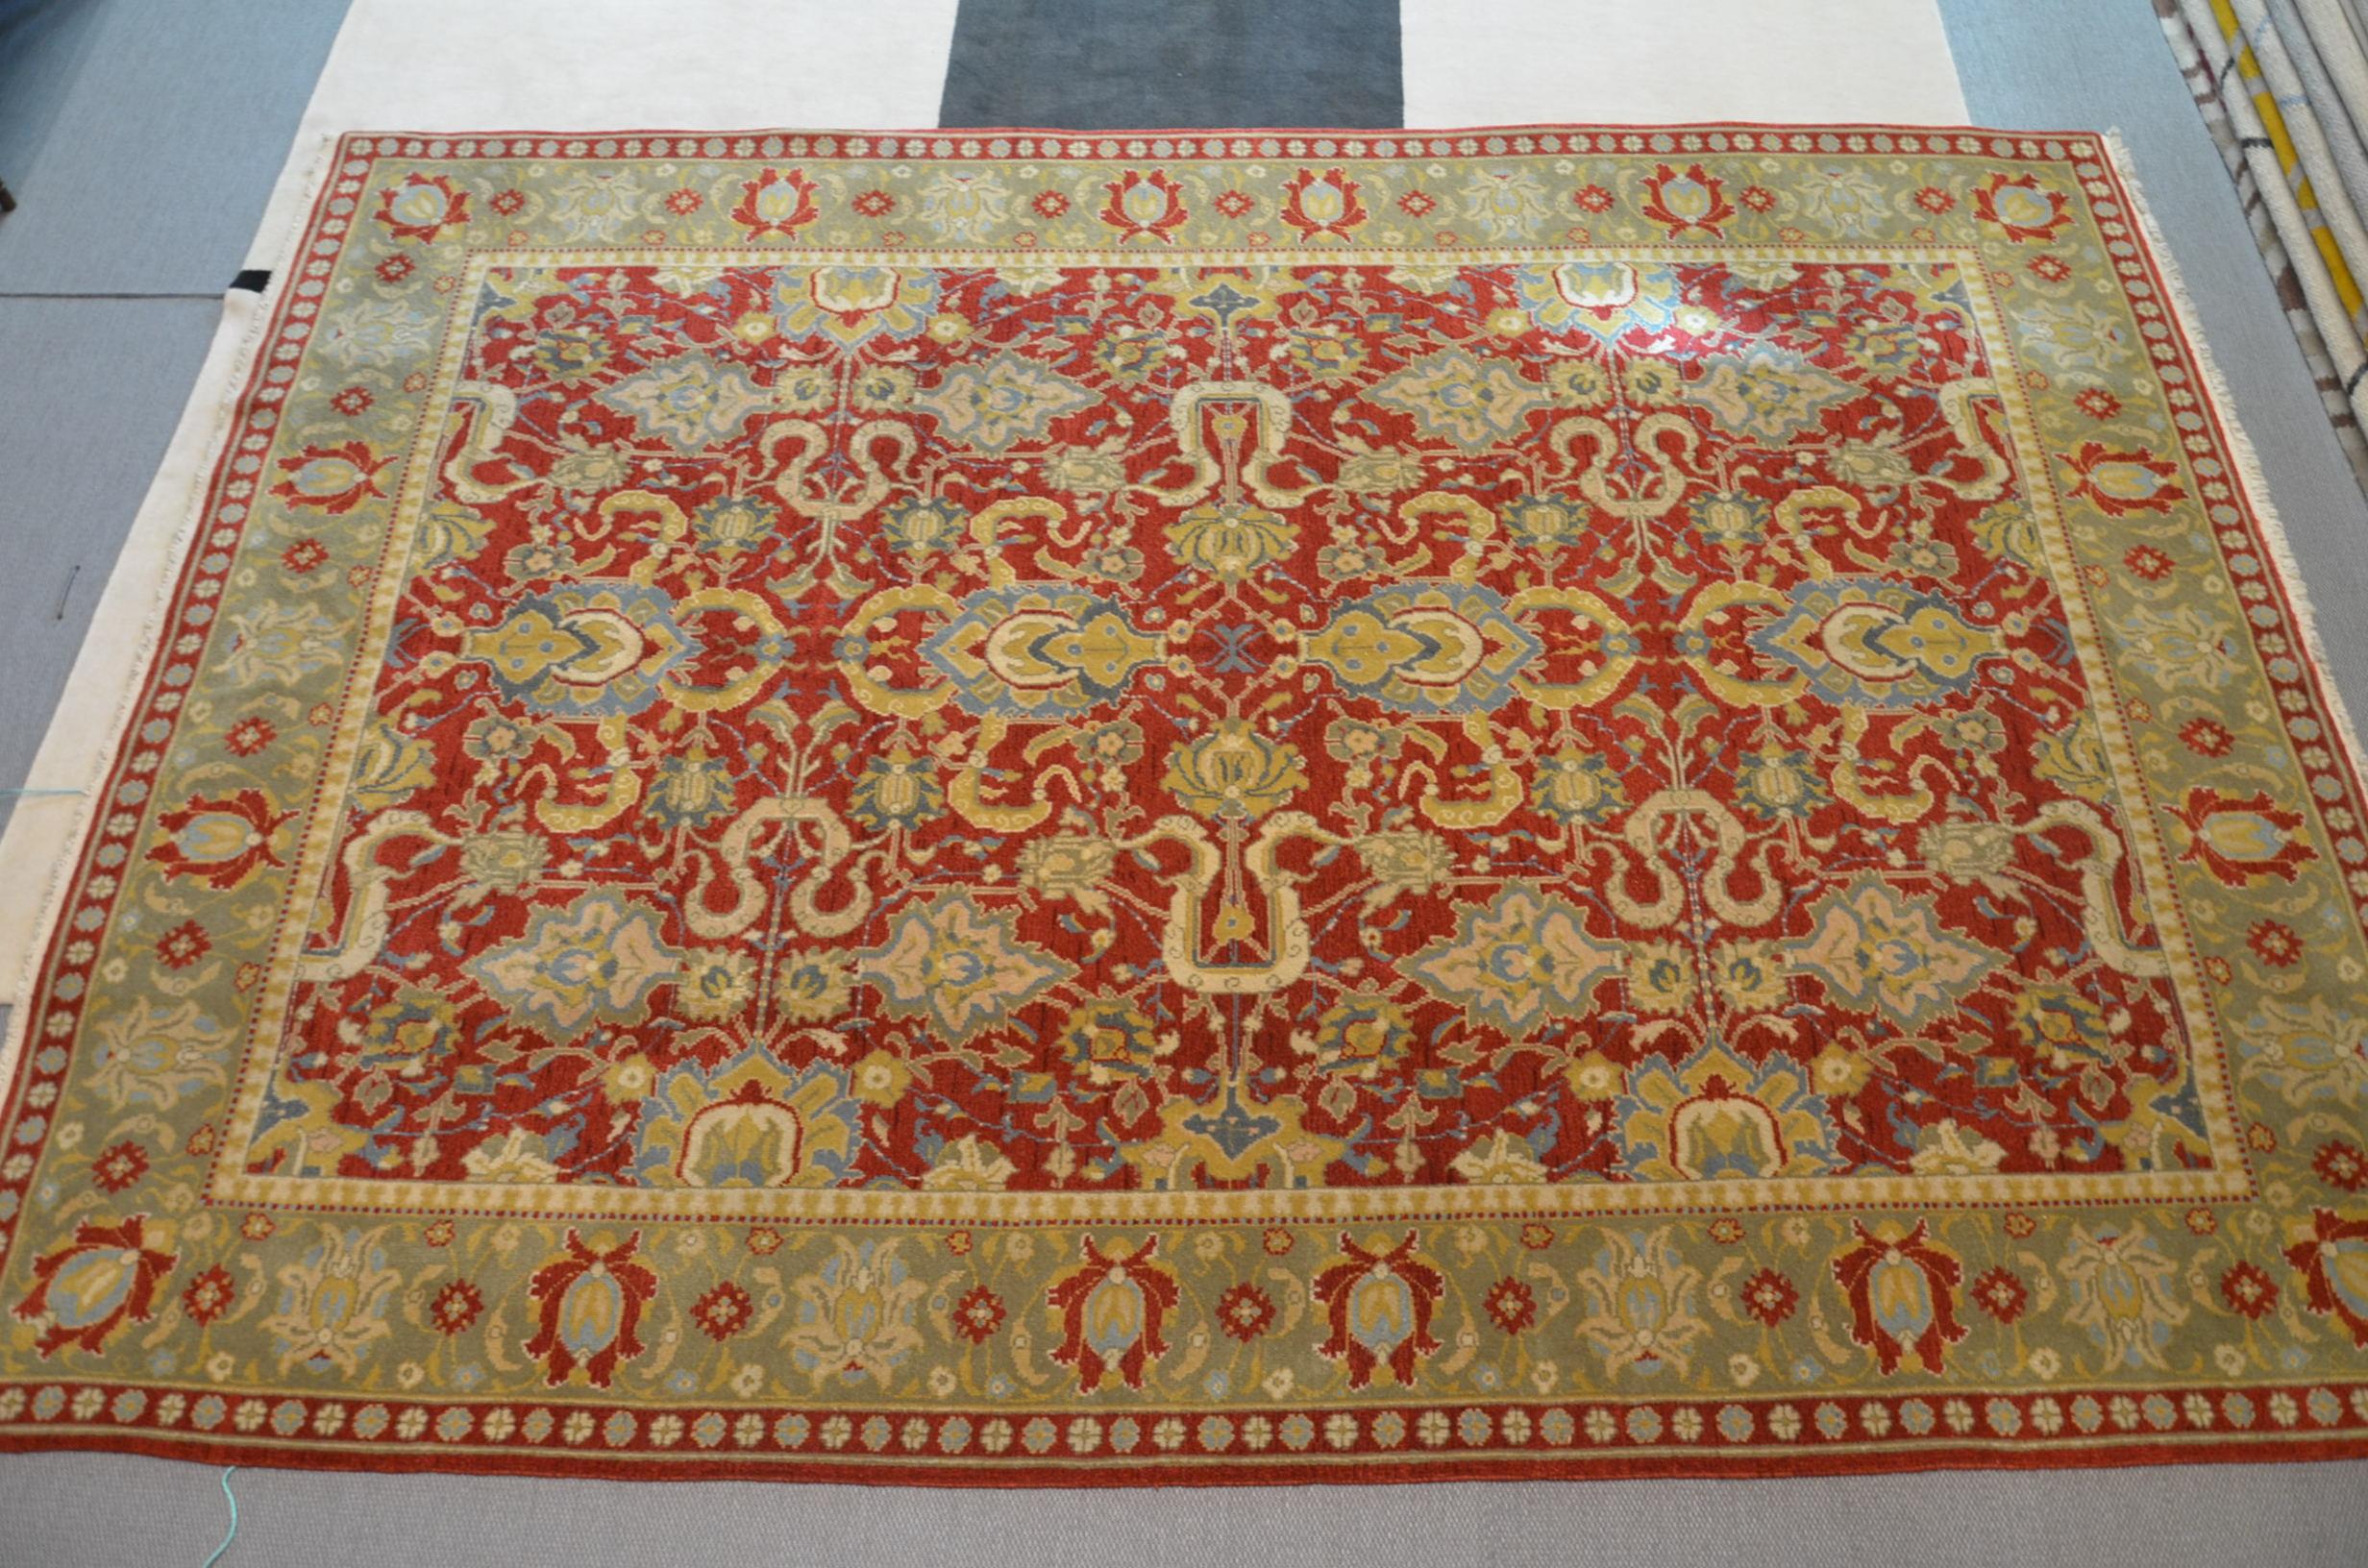 Hand-Knotted Agra India Rug. 3.20 x 2.30 m For Sale